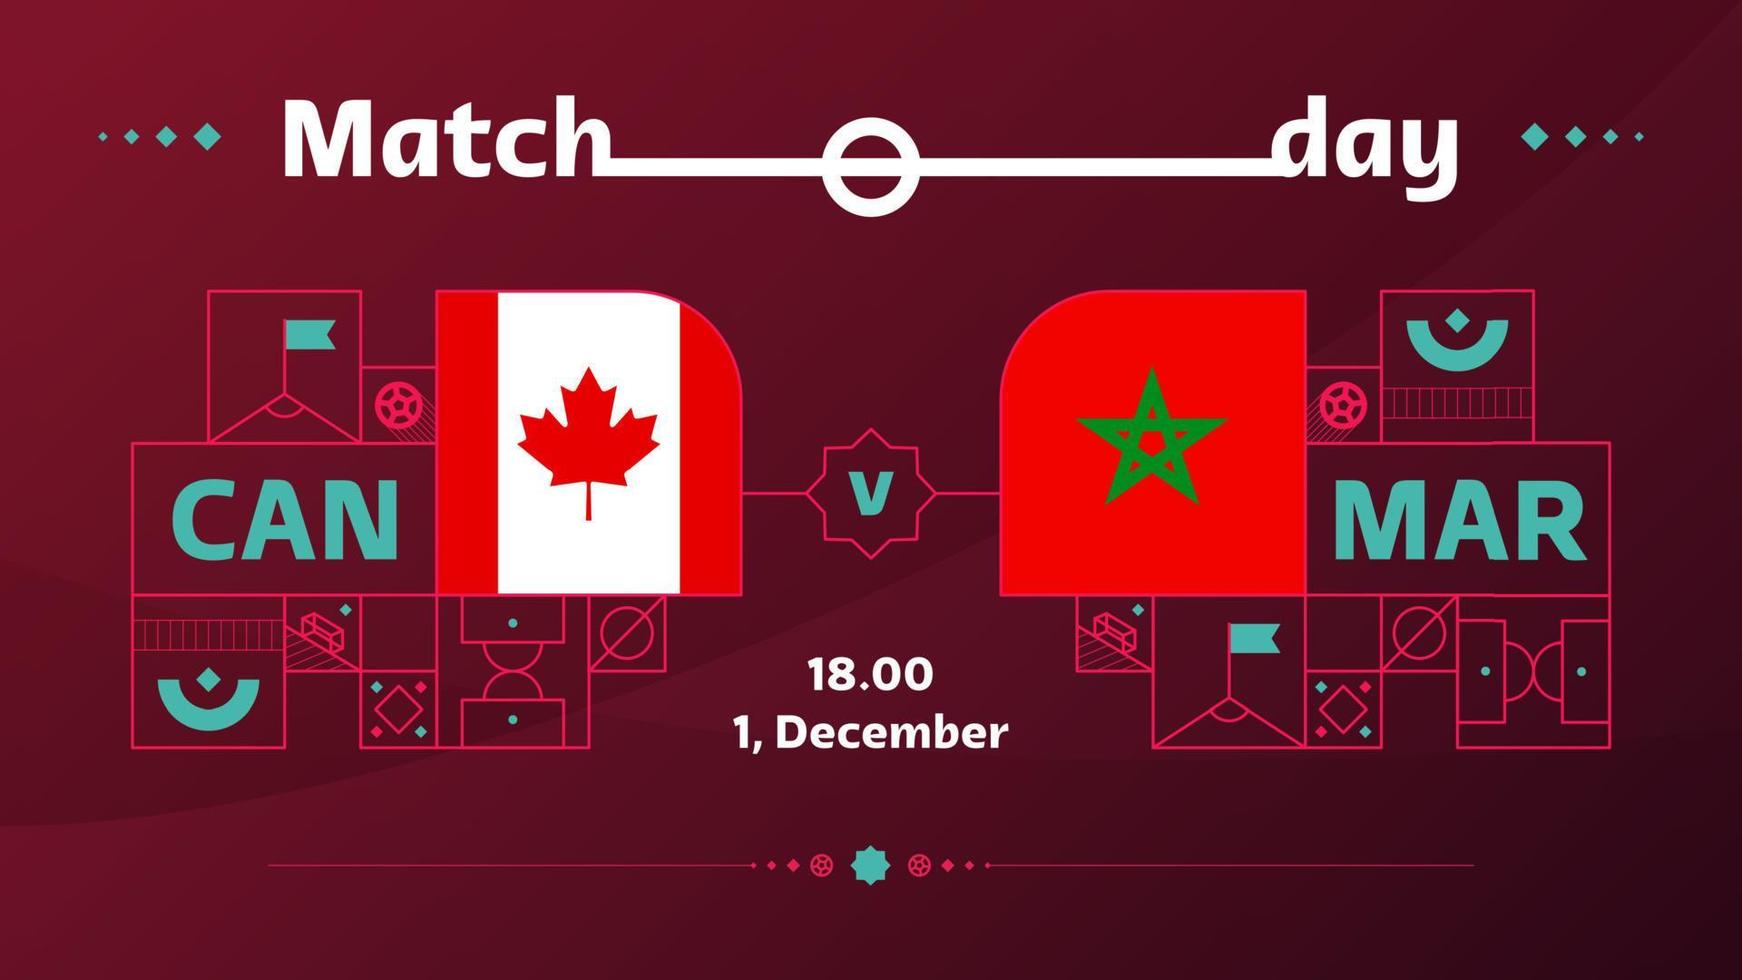 canada morocco match Football 2022. 2022 World Football Competition championship match versus teams intro sport background, championship competition poster, vector illustration